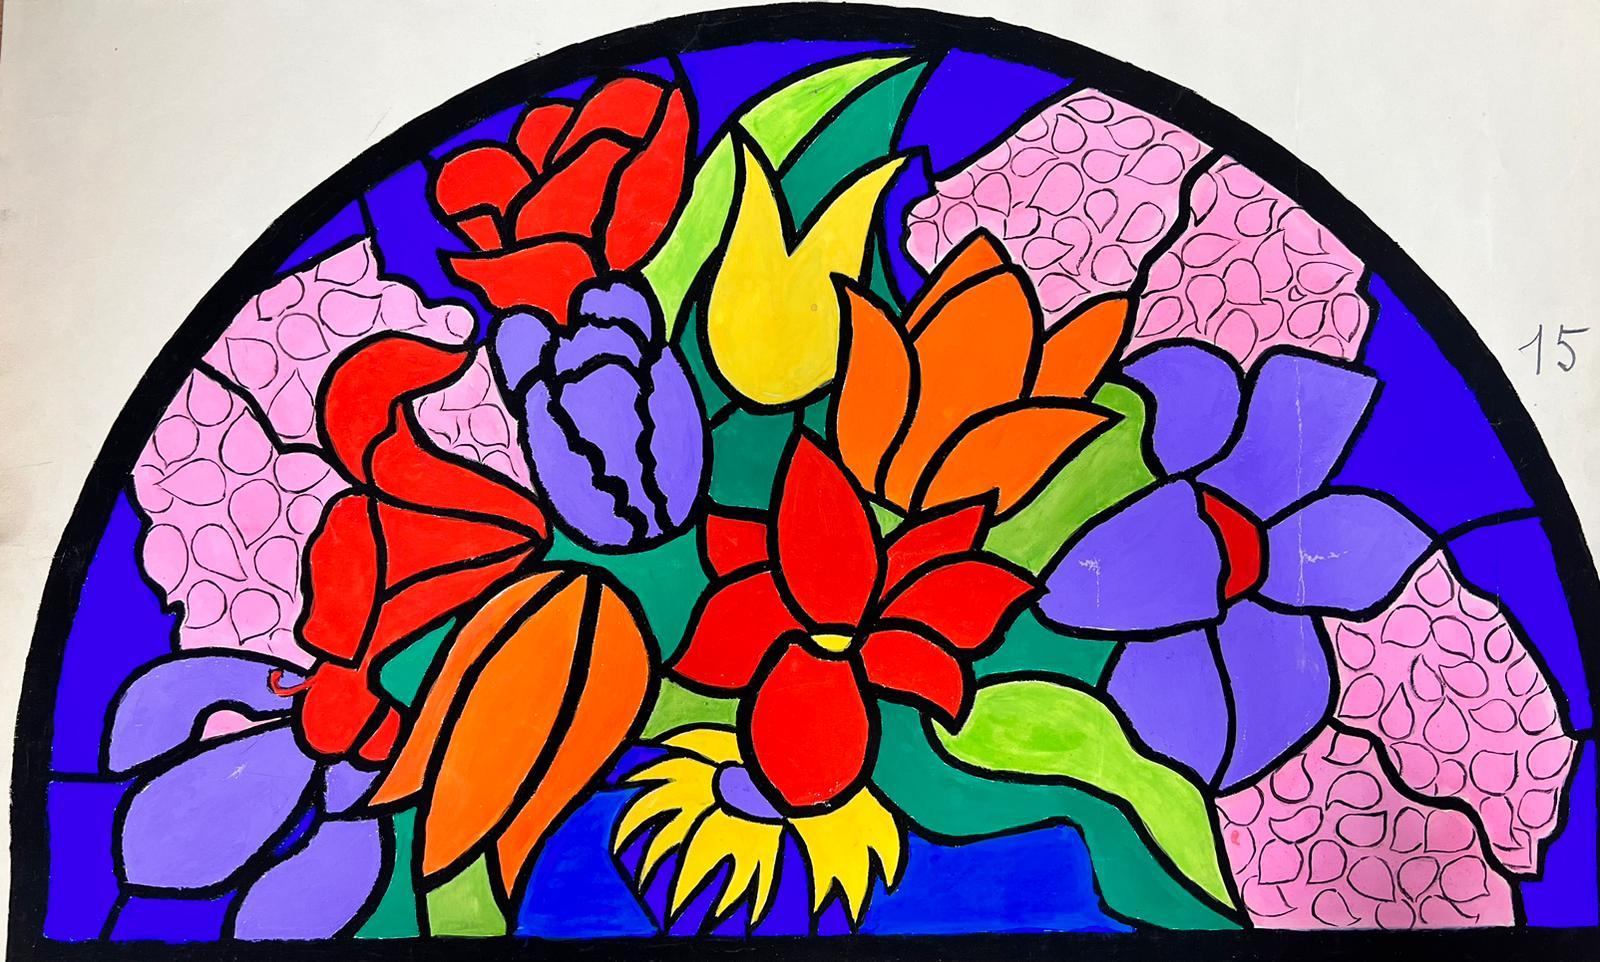 Mid Century French Illustration Of A Floral Stained Glass Window Sketch - Art by Josine Vignon